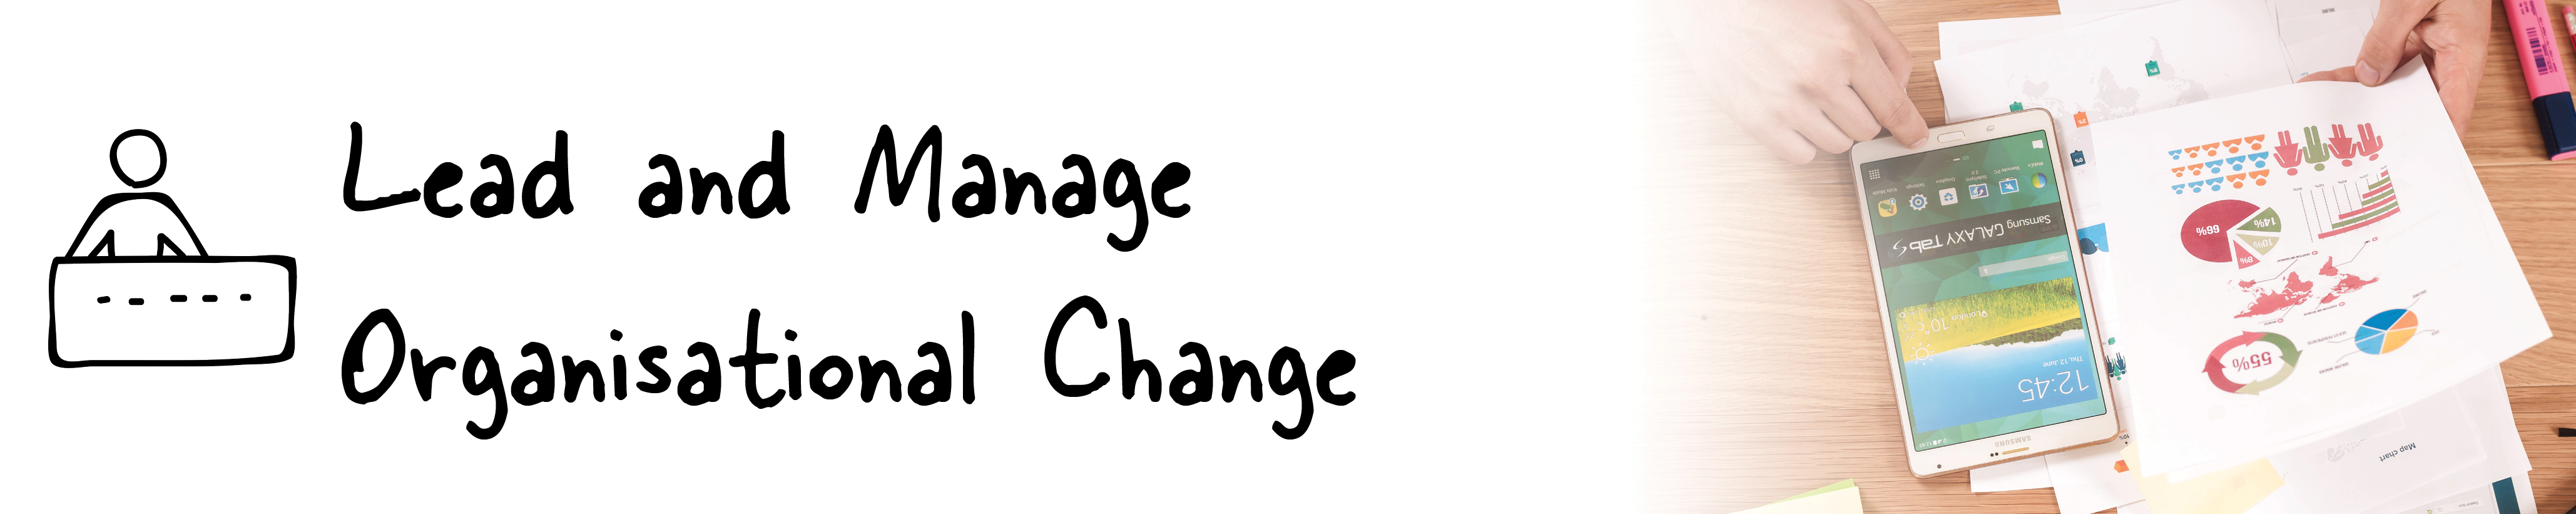 Lead and Manage Organisational Change